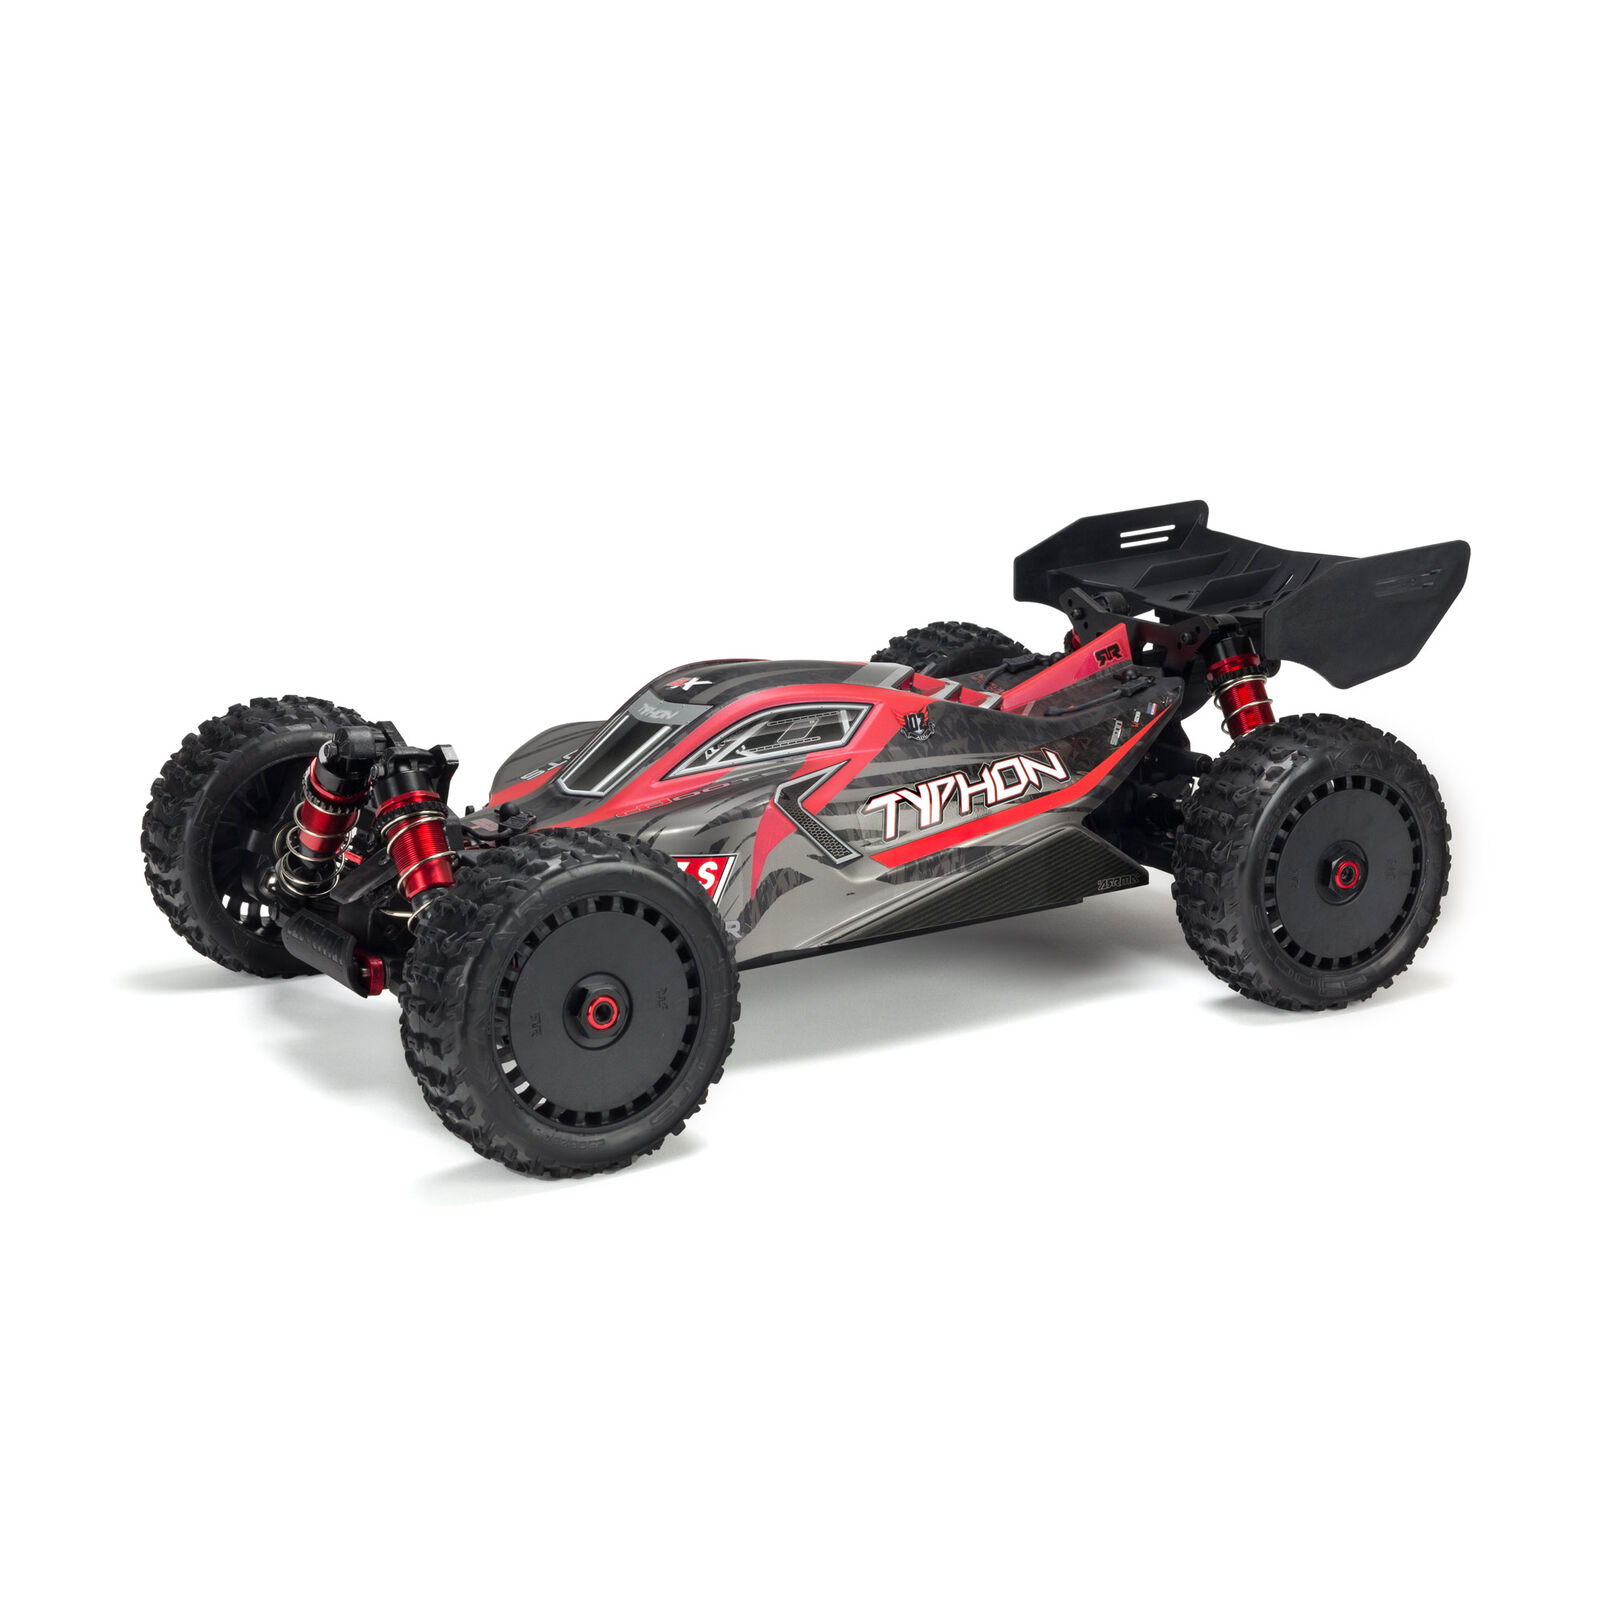 1/8 Painted Body with Decals, Black/Red: TYPHON 6S